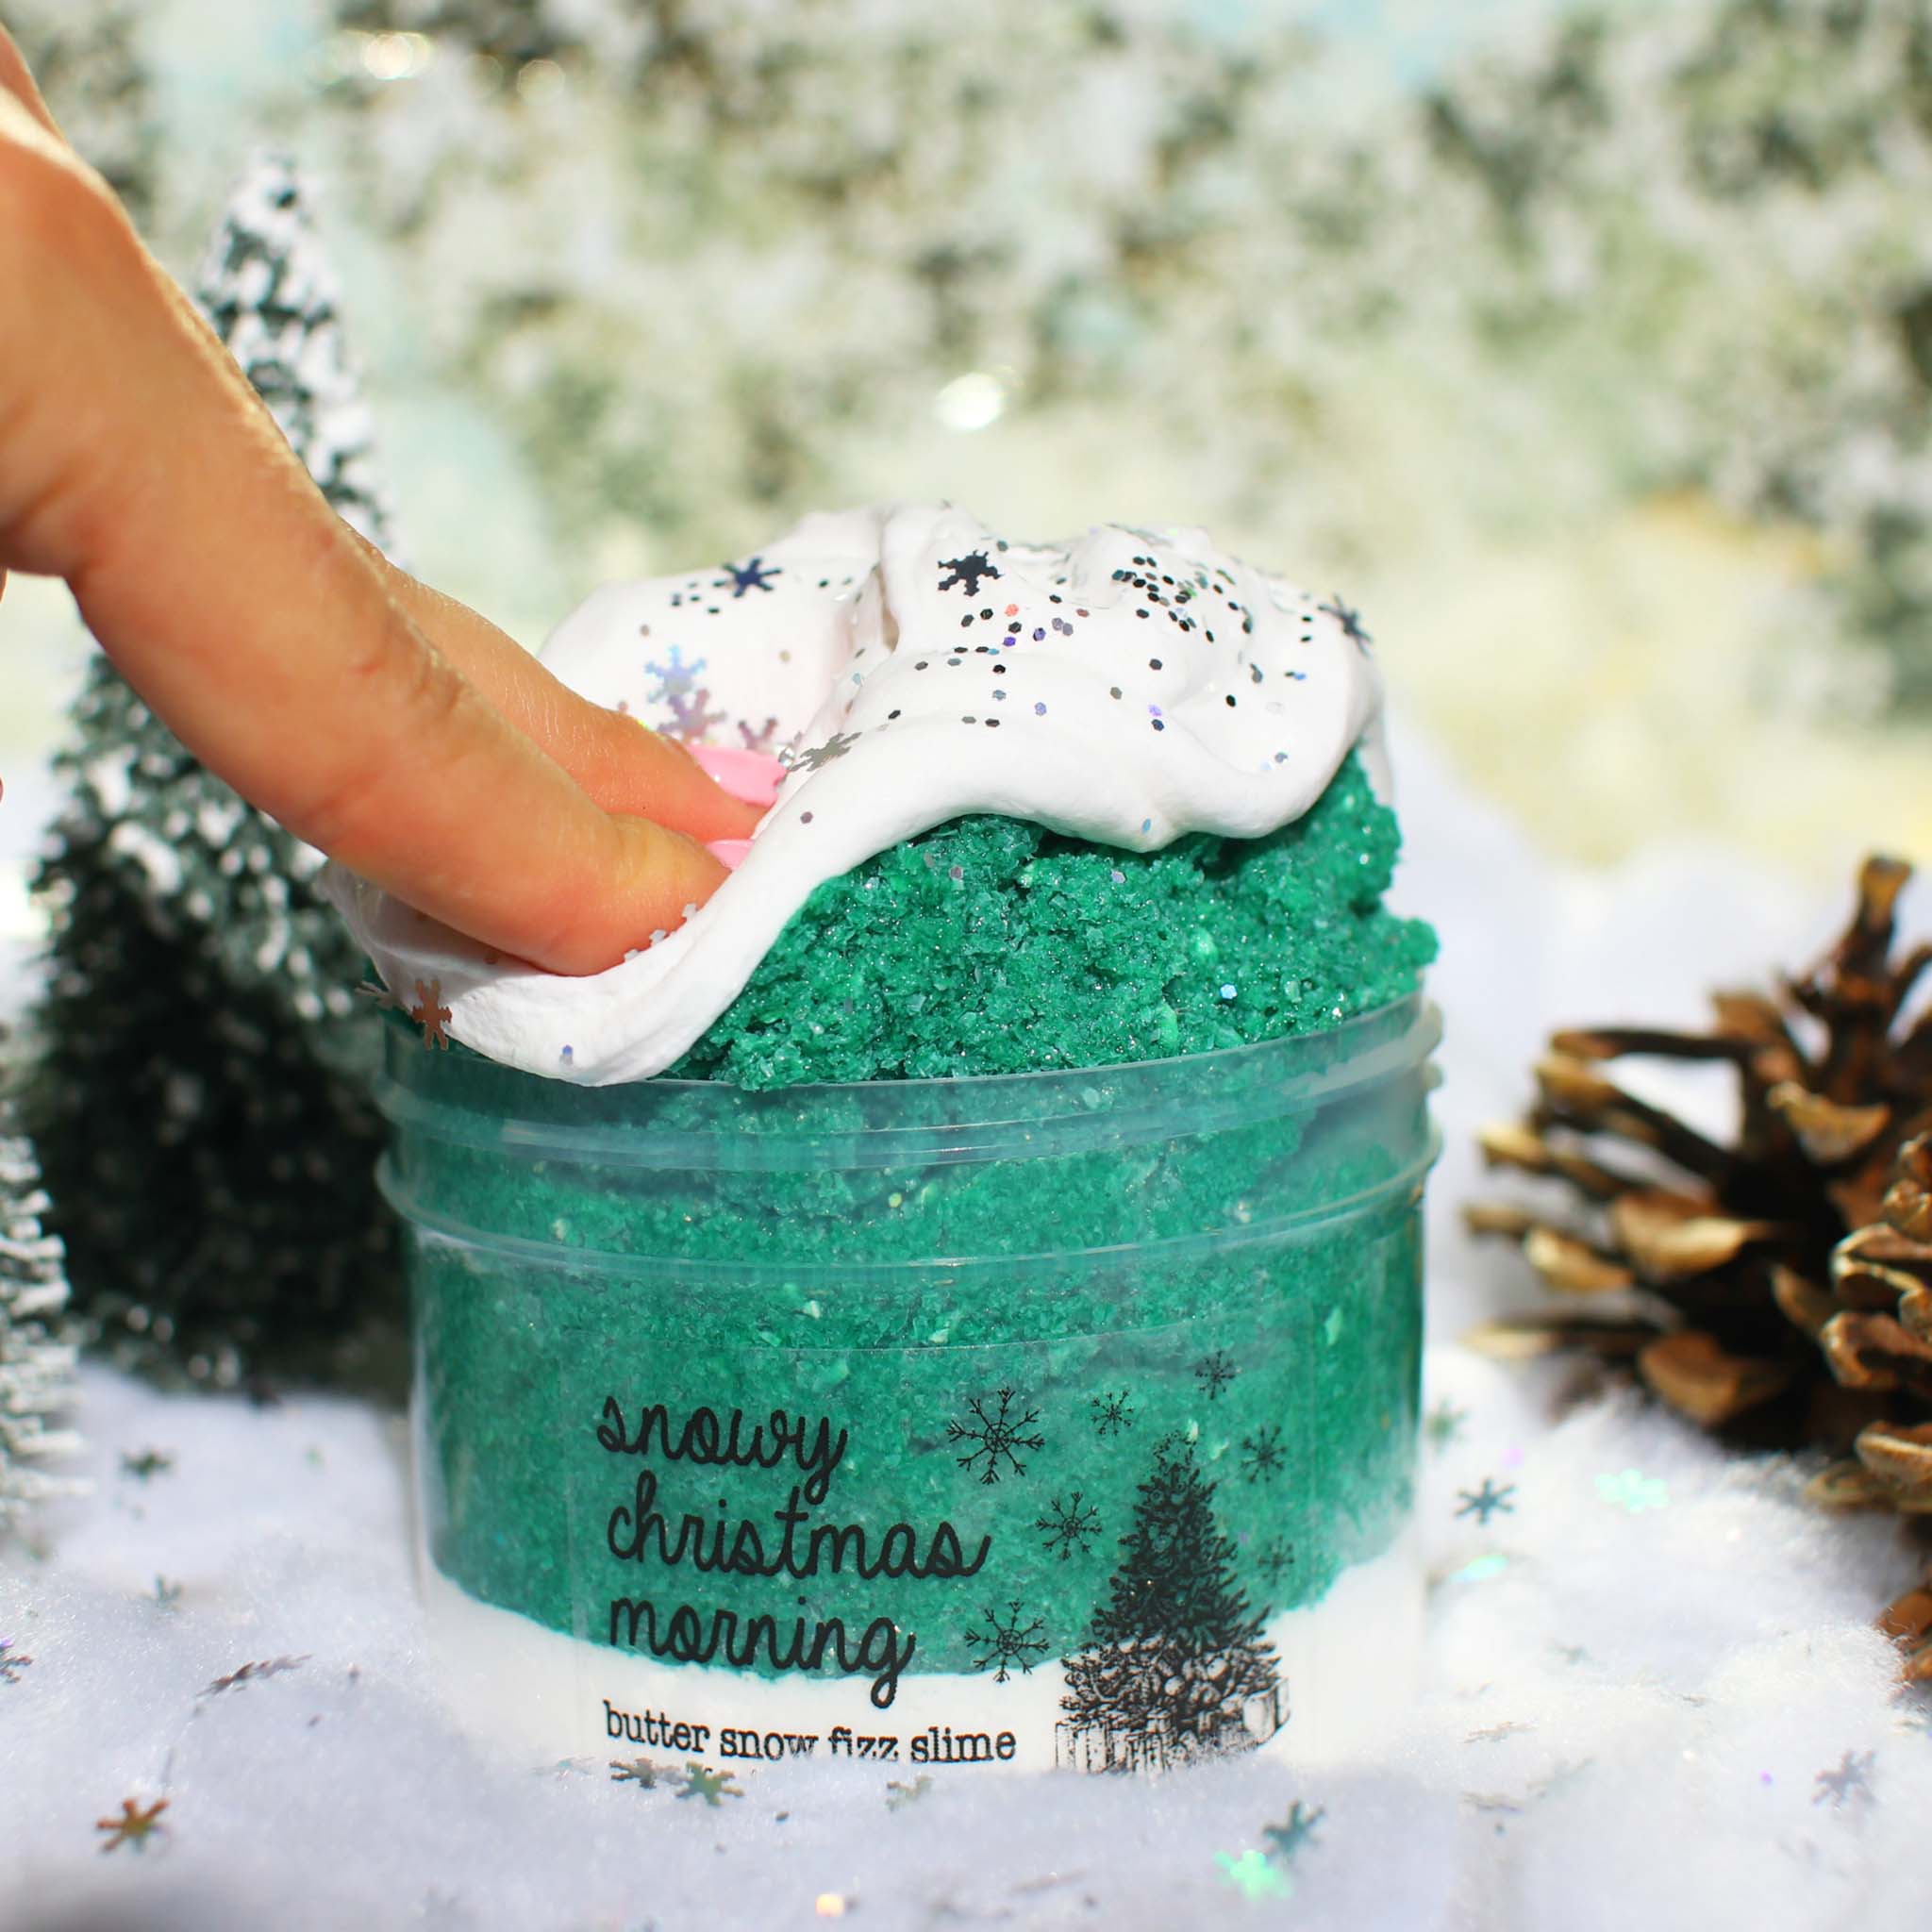 Snowy Christmas Morning Christmas Slime Gift For Kids Green White Tree Scented Clay Creamy Crunchy Butter Snow Fizz Slime Fantasies Shop 9oz Front View Pressing